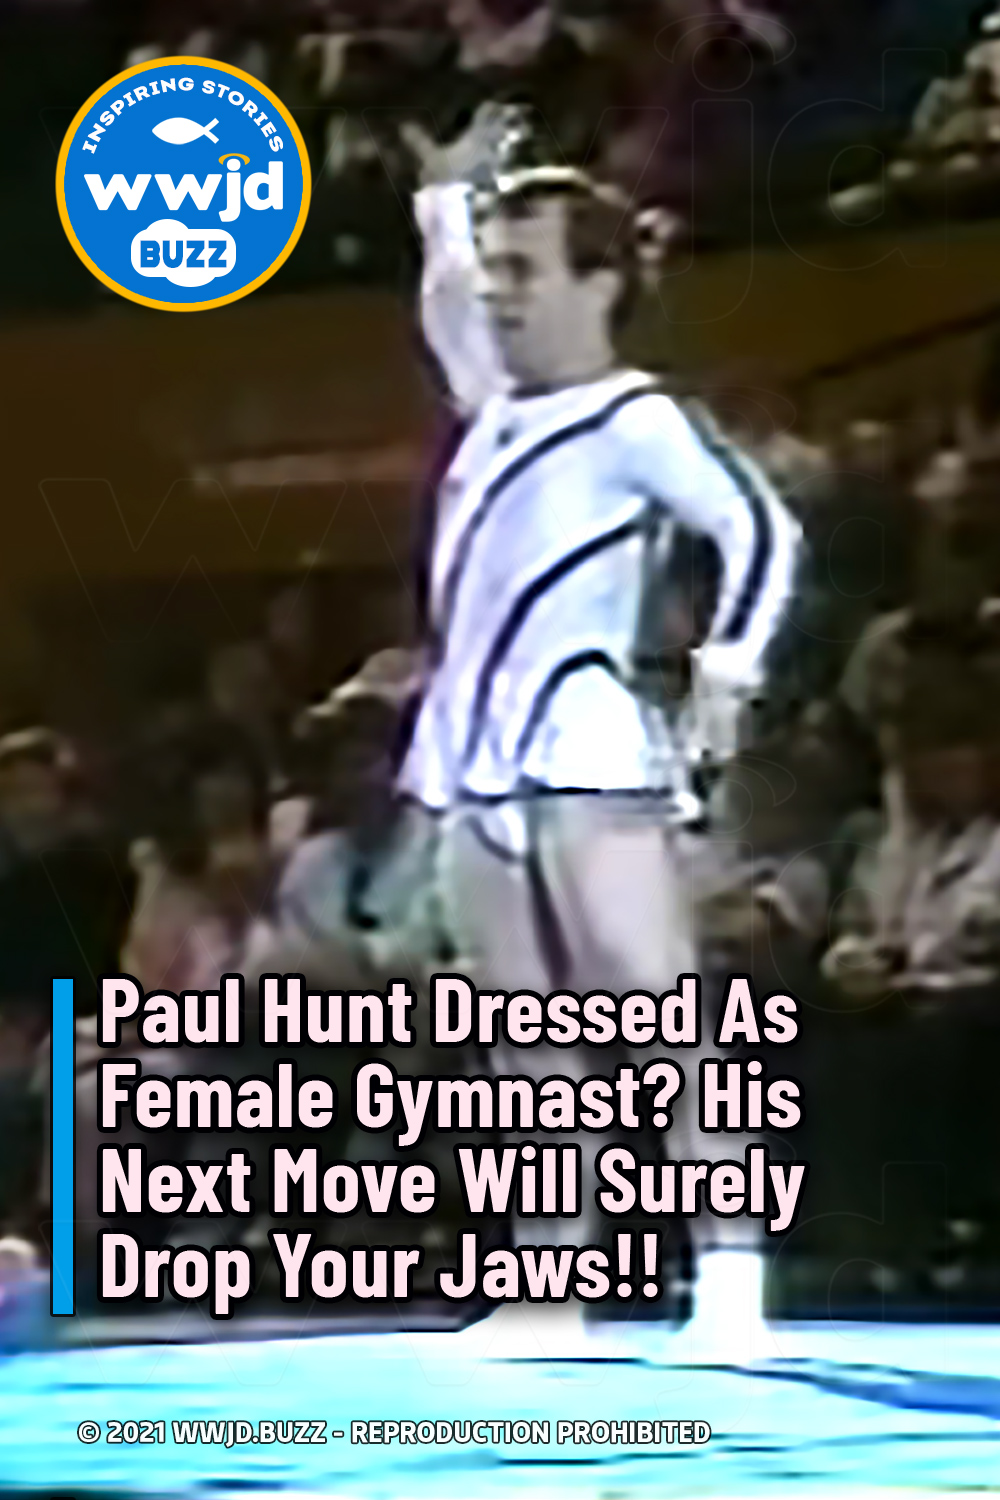 Paul Hunt Dressed As Female Gymnast? His Next Move Will Surely Drop Your Jaws!!